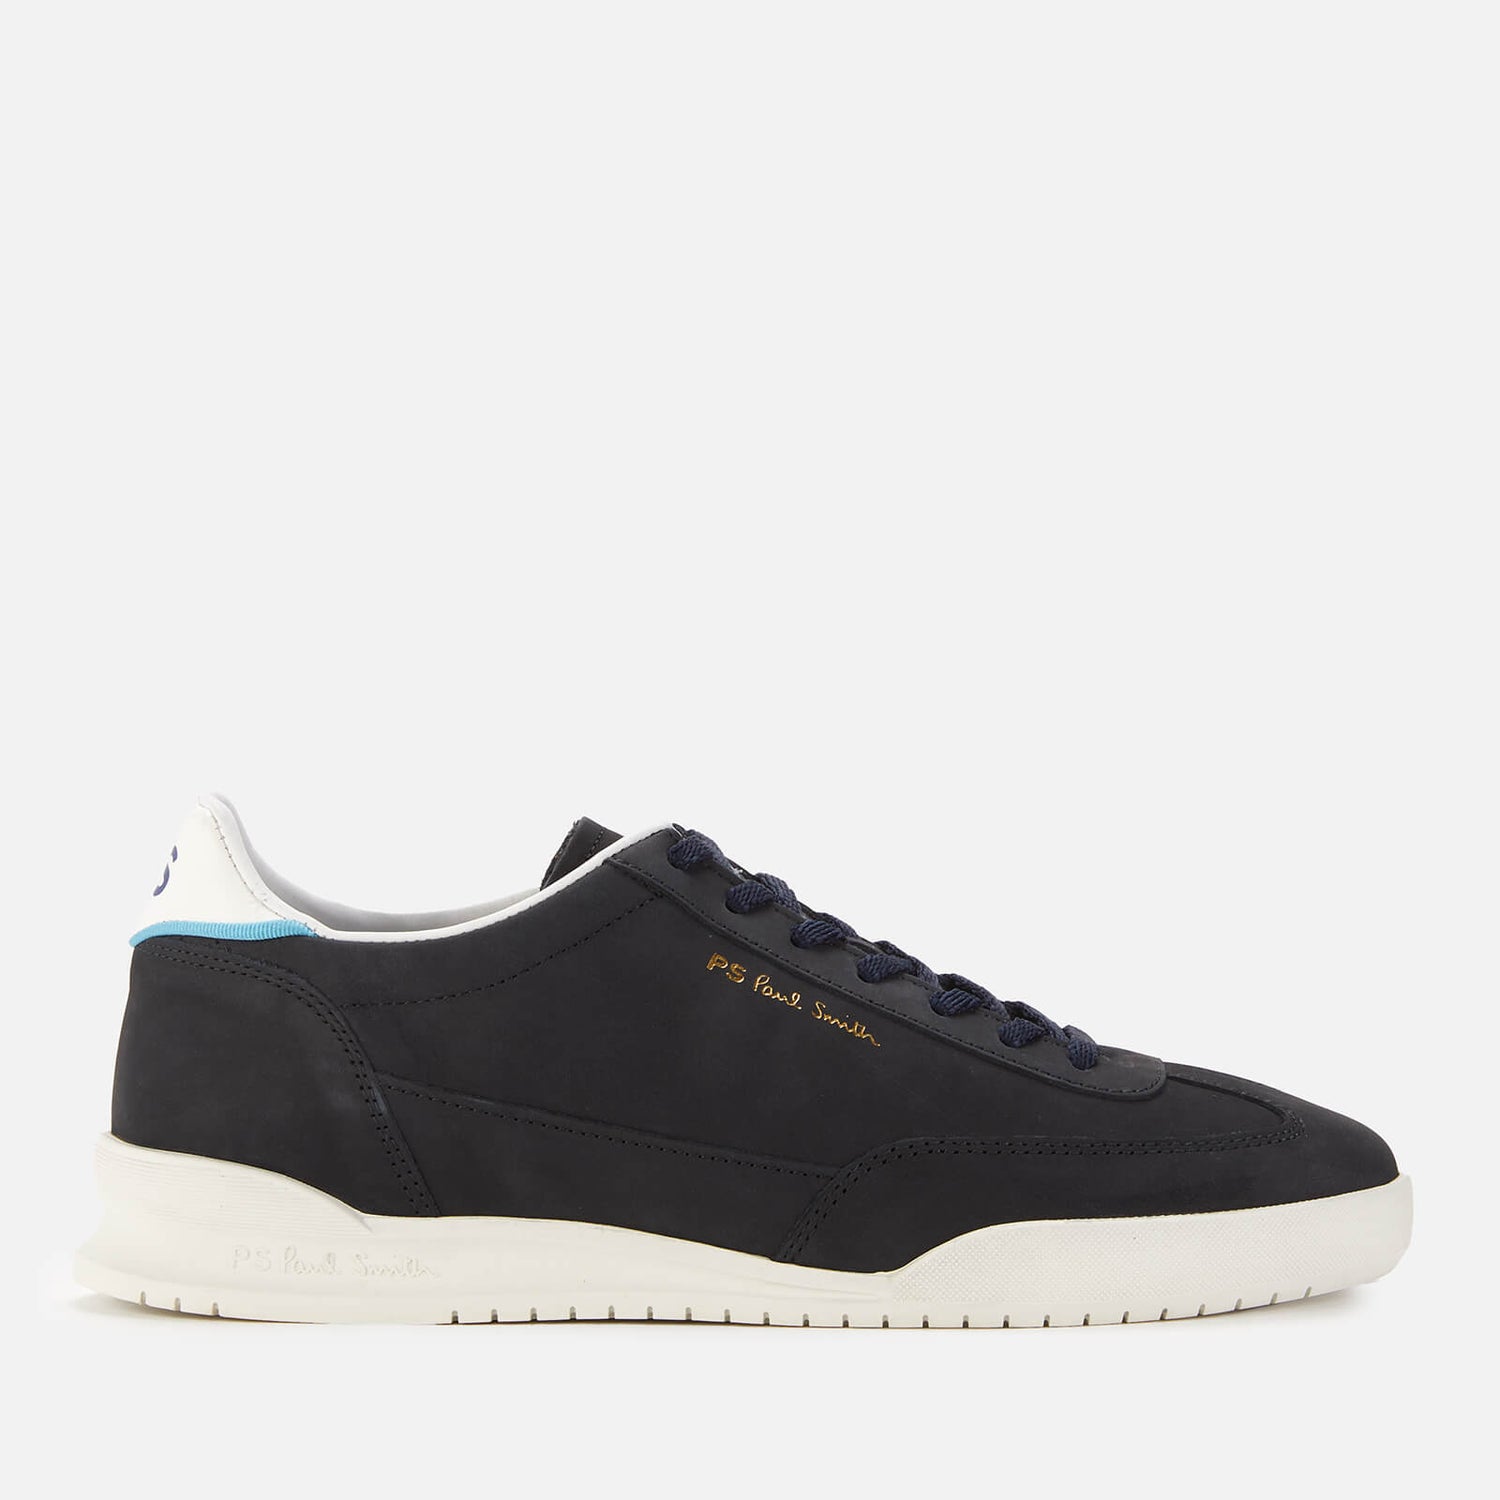 PS Paul Smith Men's Dover Suede Cupsole Trainers - Navy - UK 7